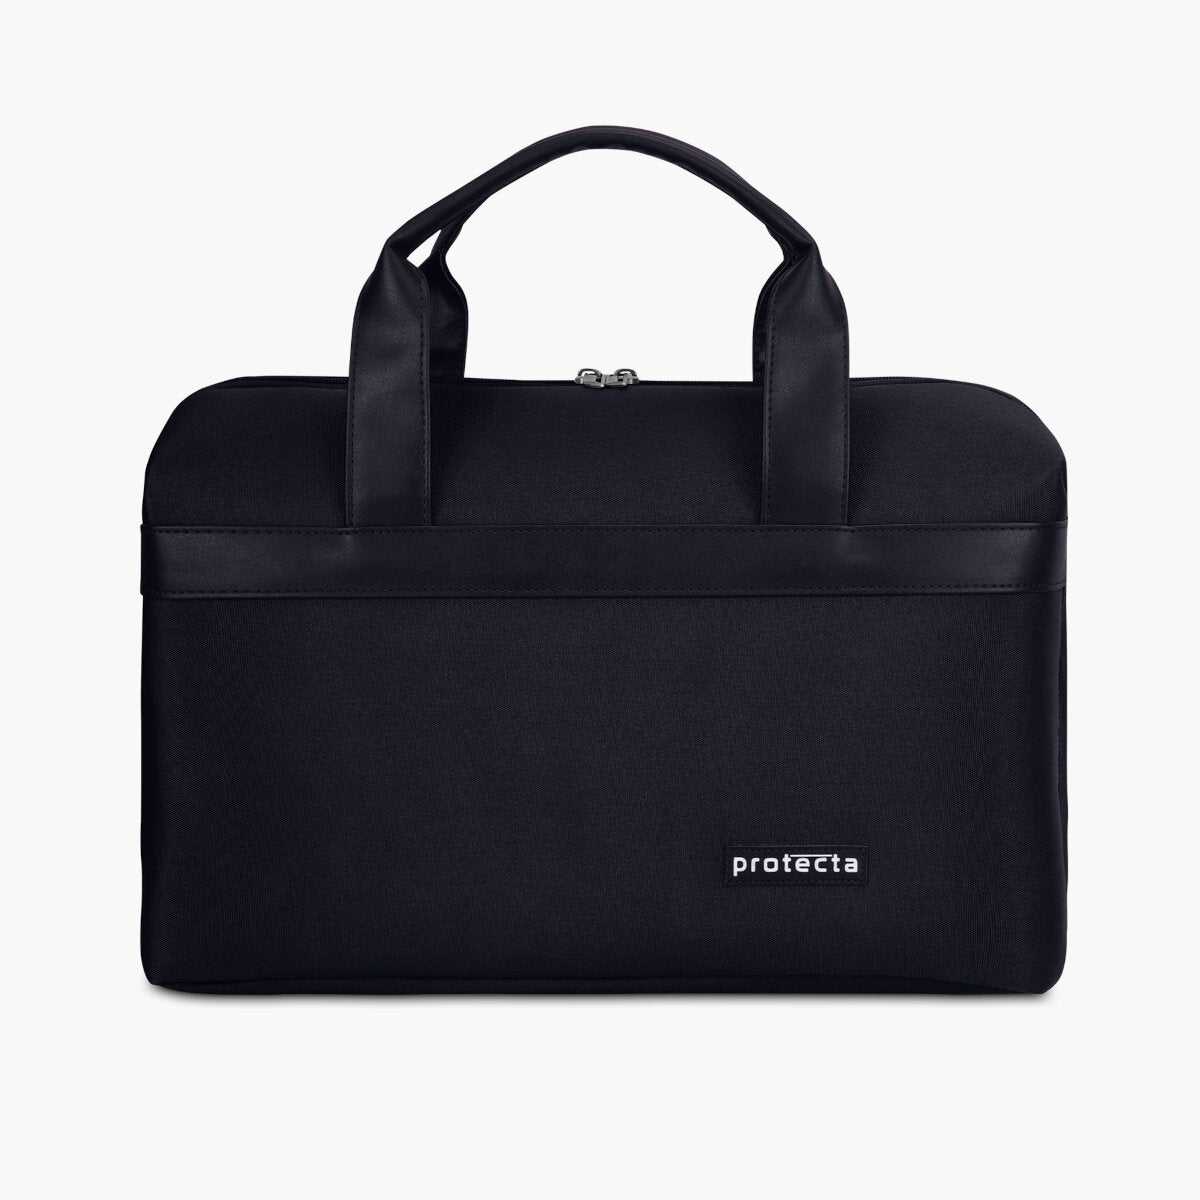 Black | Protecta Early Lead Anti-Theft Office Laptop Bag - Main